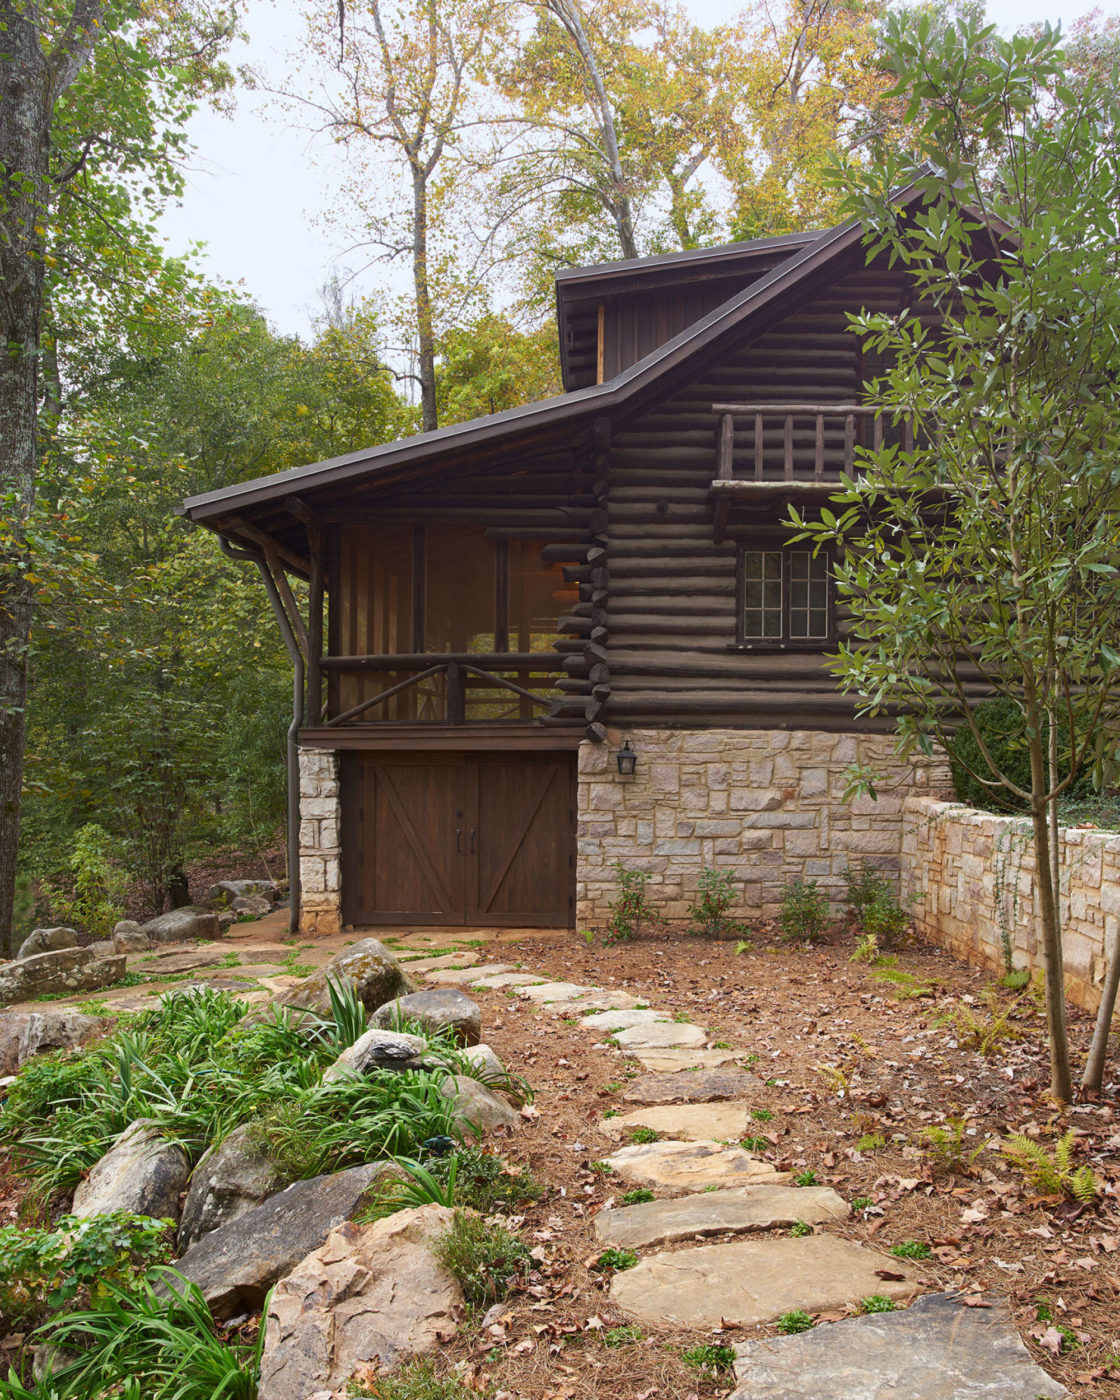 A view of one of the log cabins from the side.